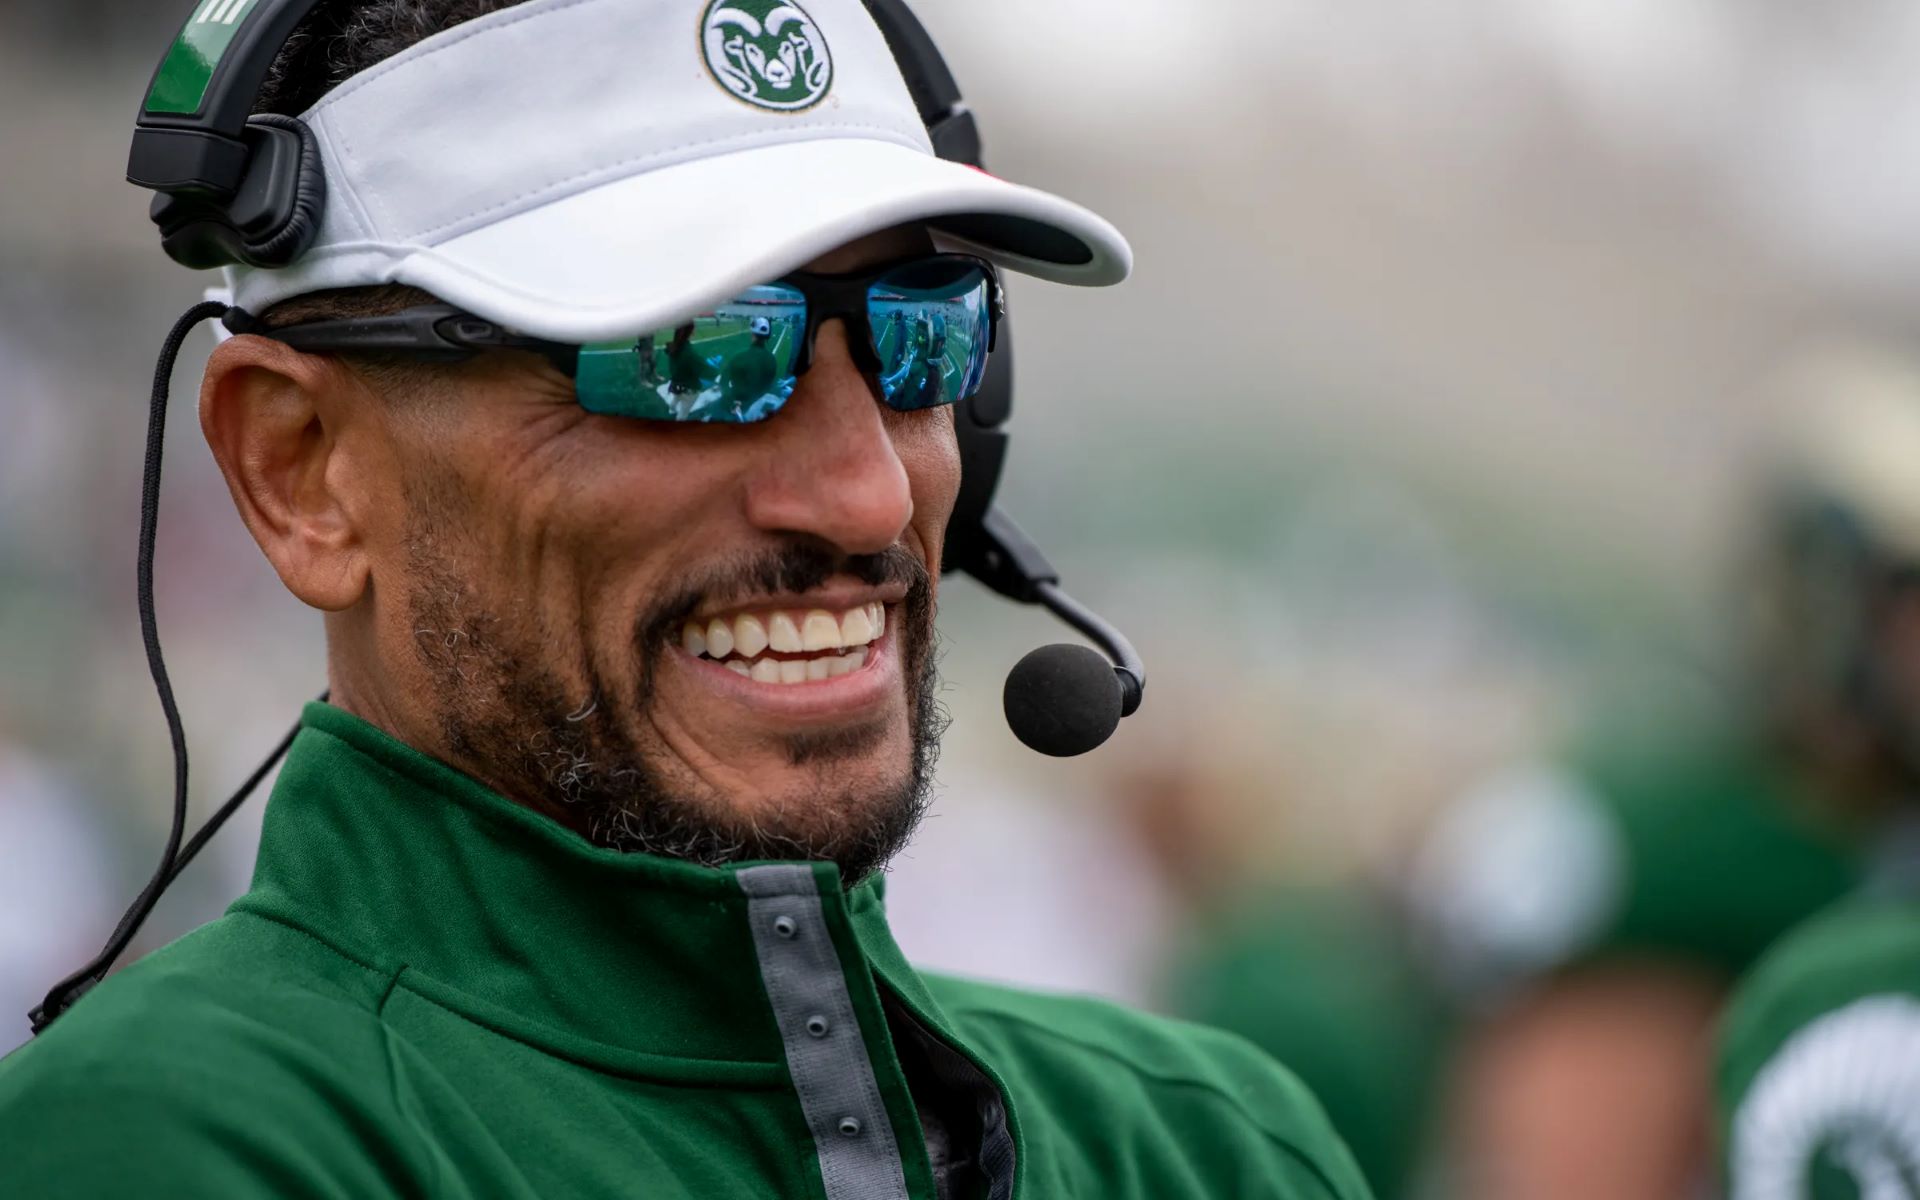 CSU Coach Jay Norvell Throws Shade At Deion Sanders With “Hat & Glasses” Barb